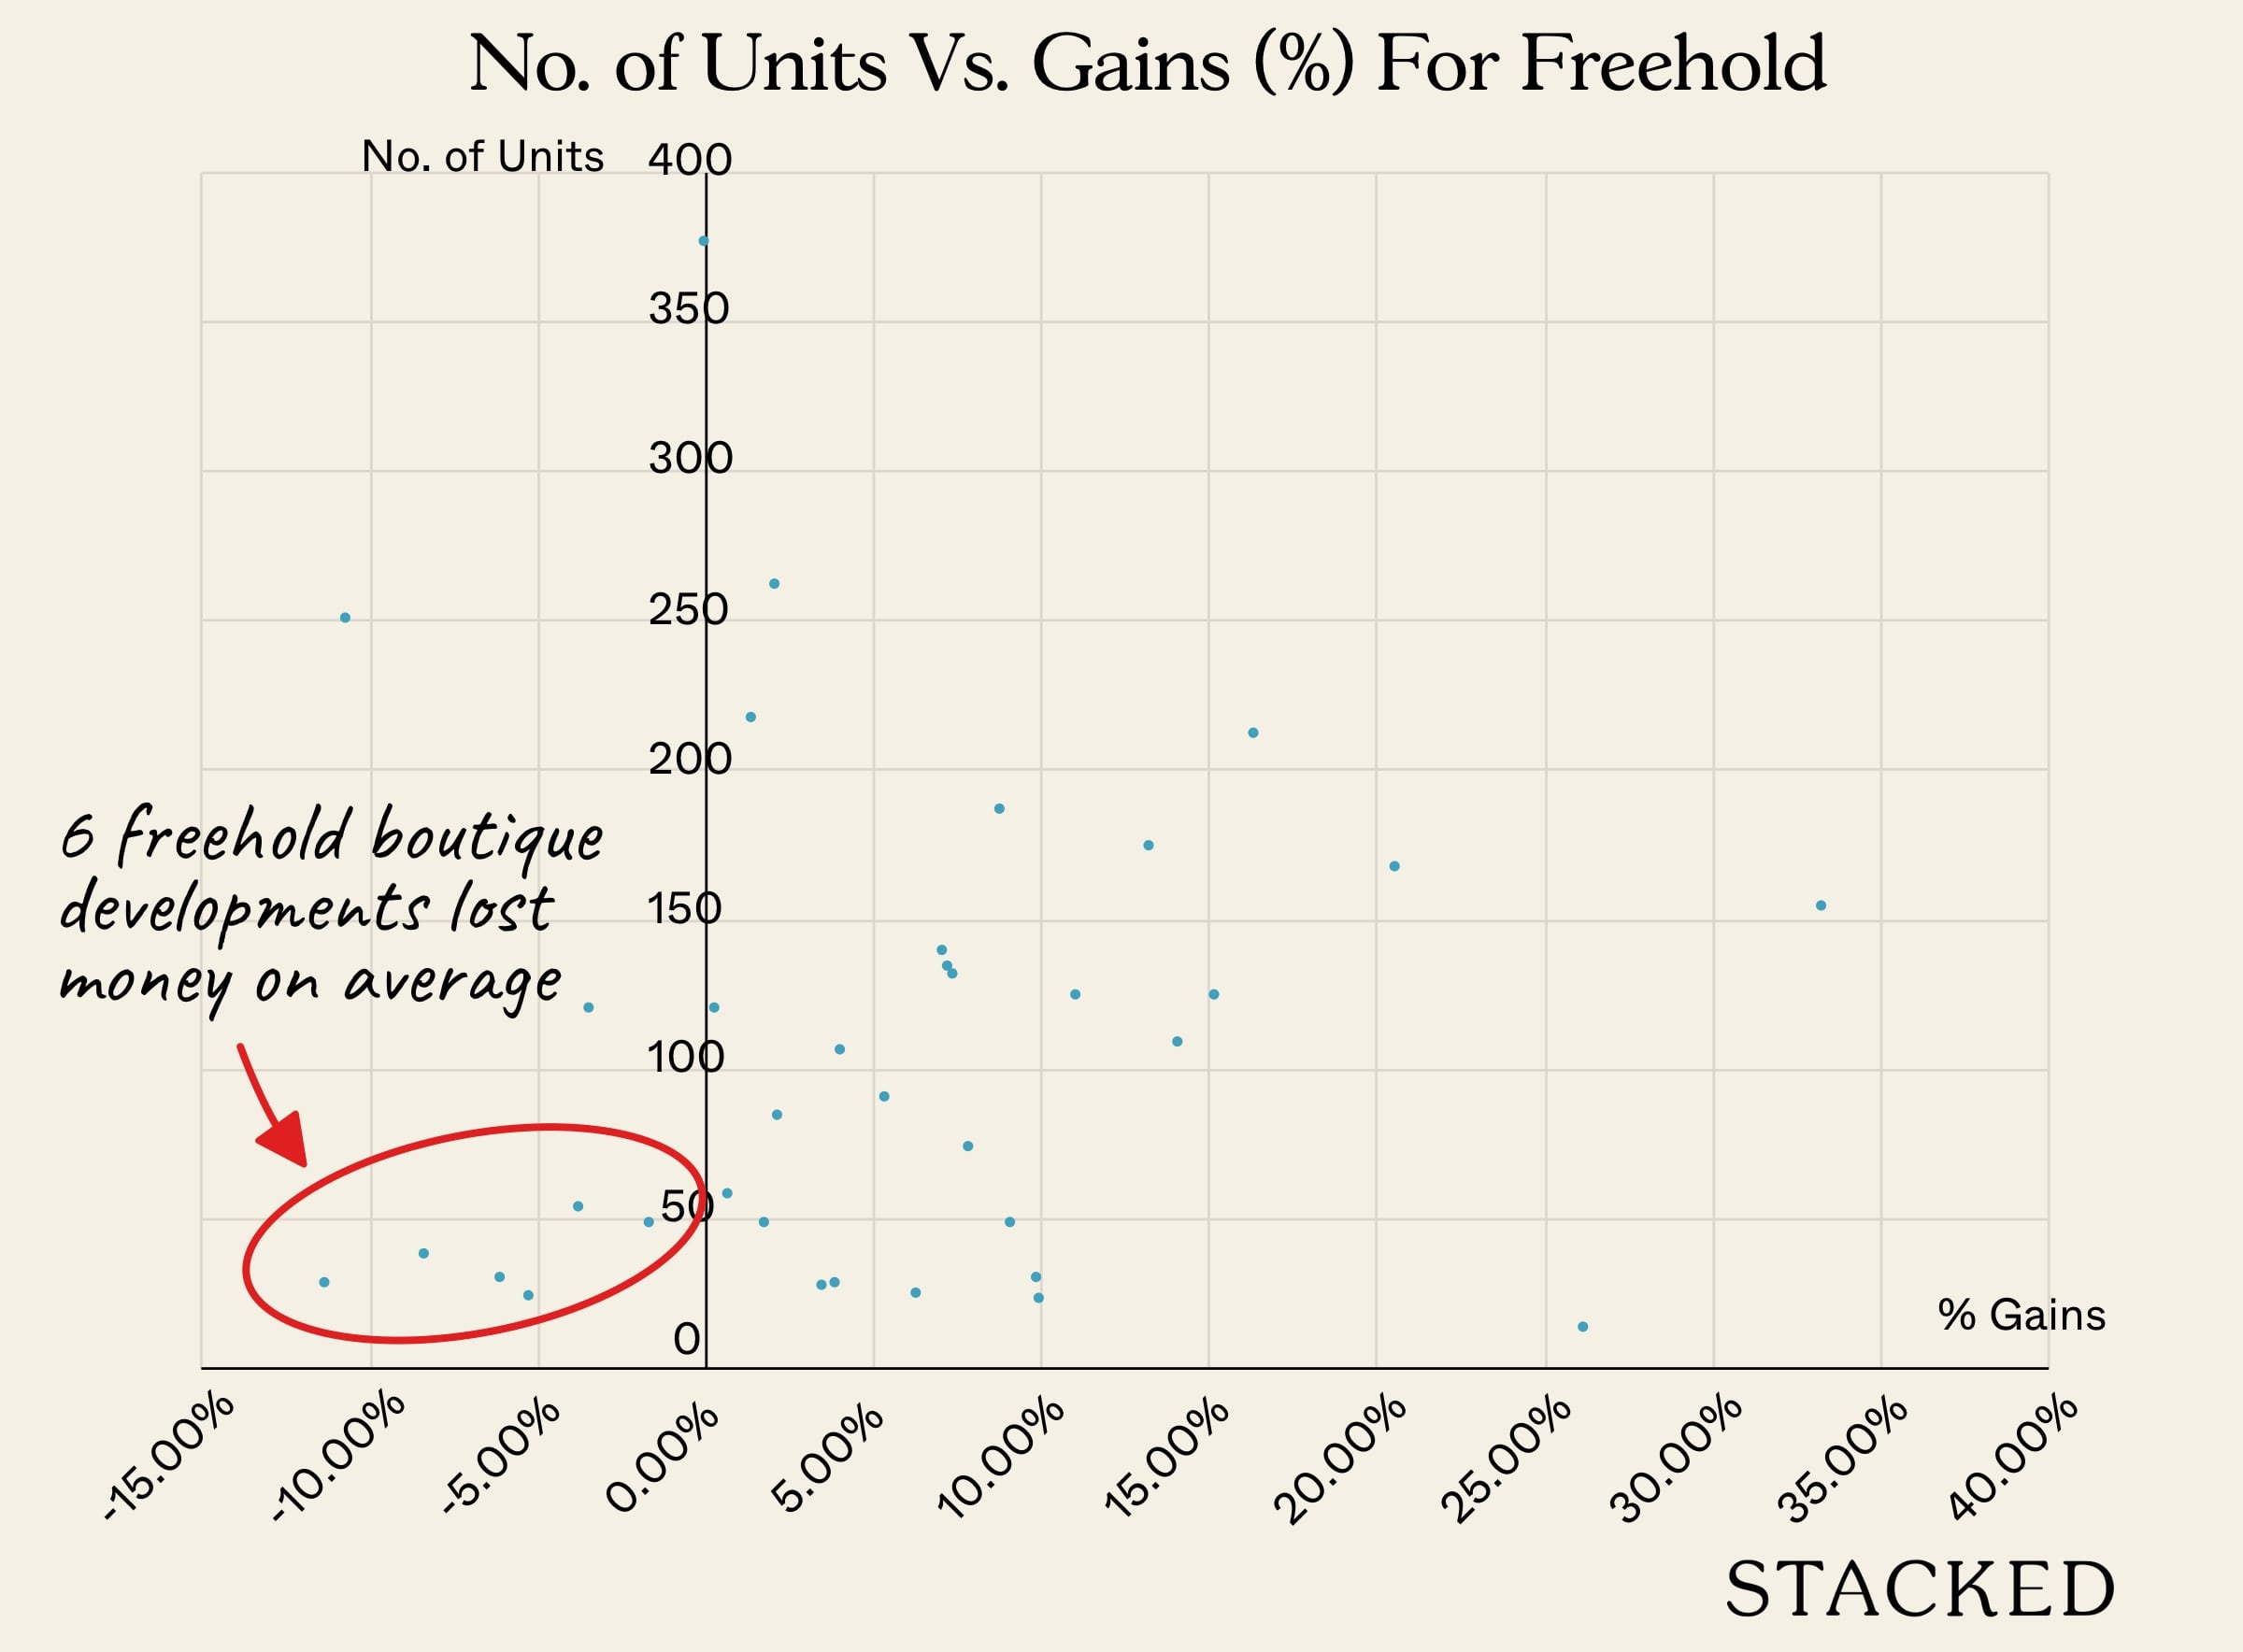 No. of Units Vs. Gains For Freehold